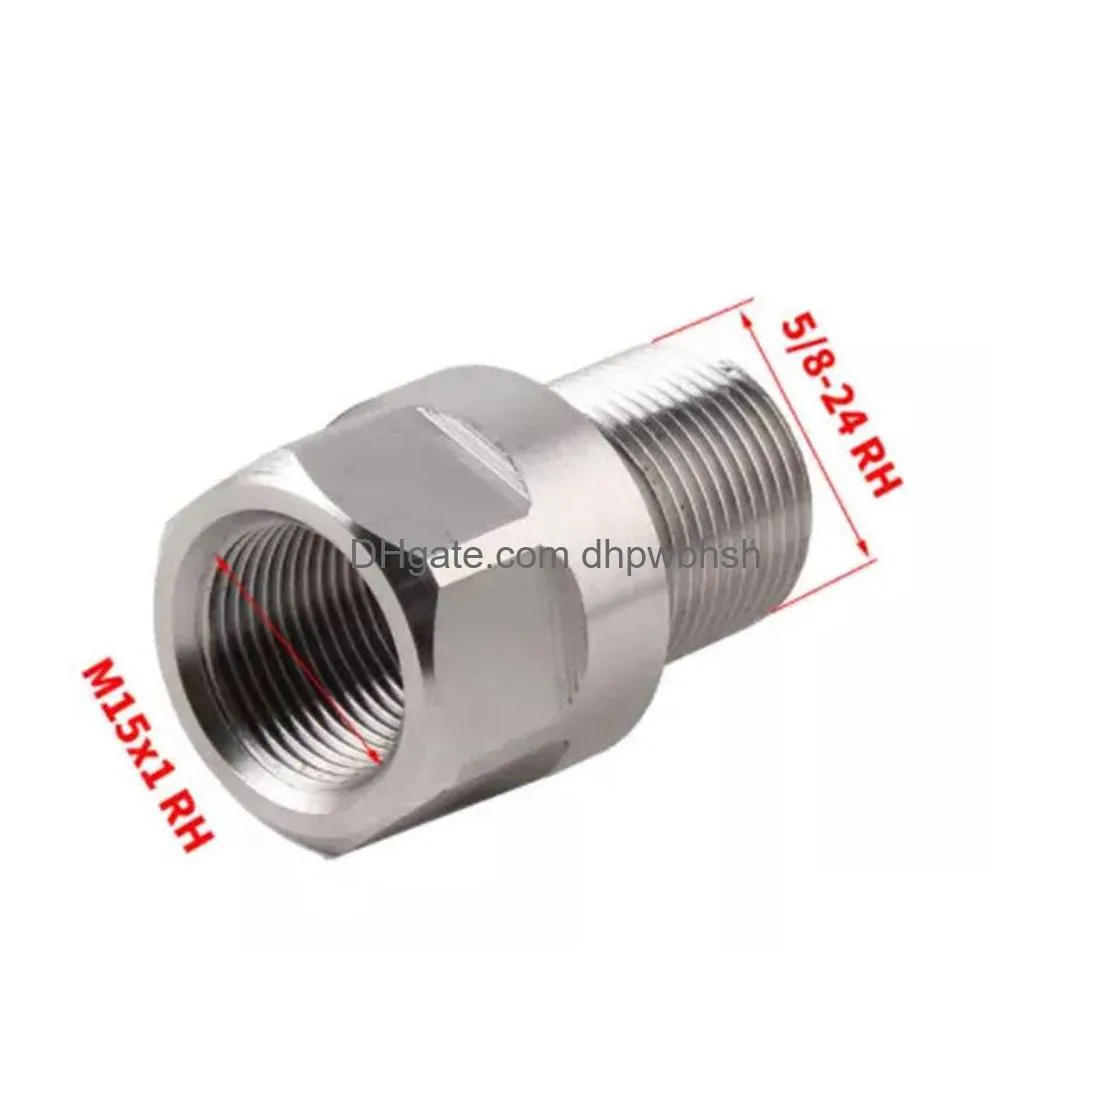 stainless steel thread adapter 1/2-28 m14x1 m15x1 to 5/8-24 for muzzle brake barrel